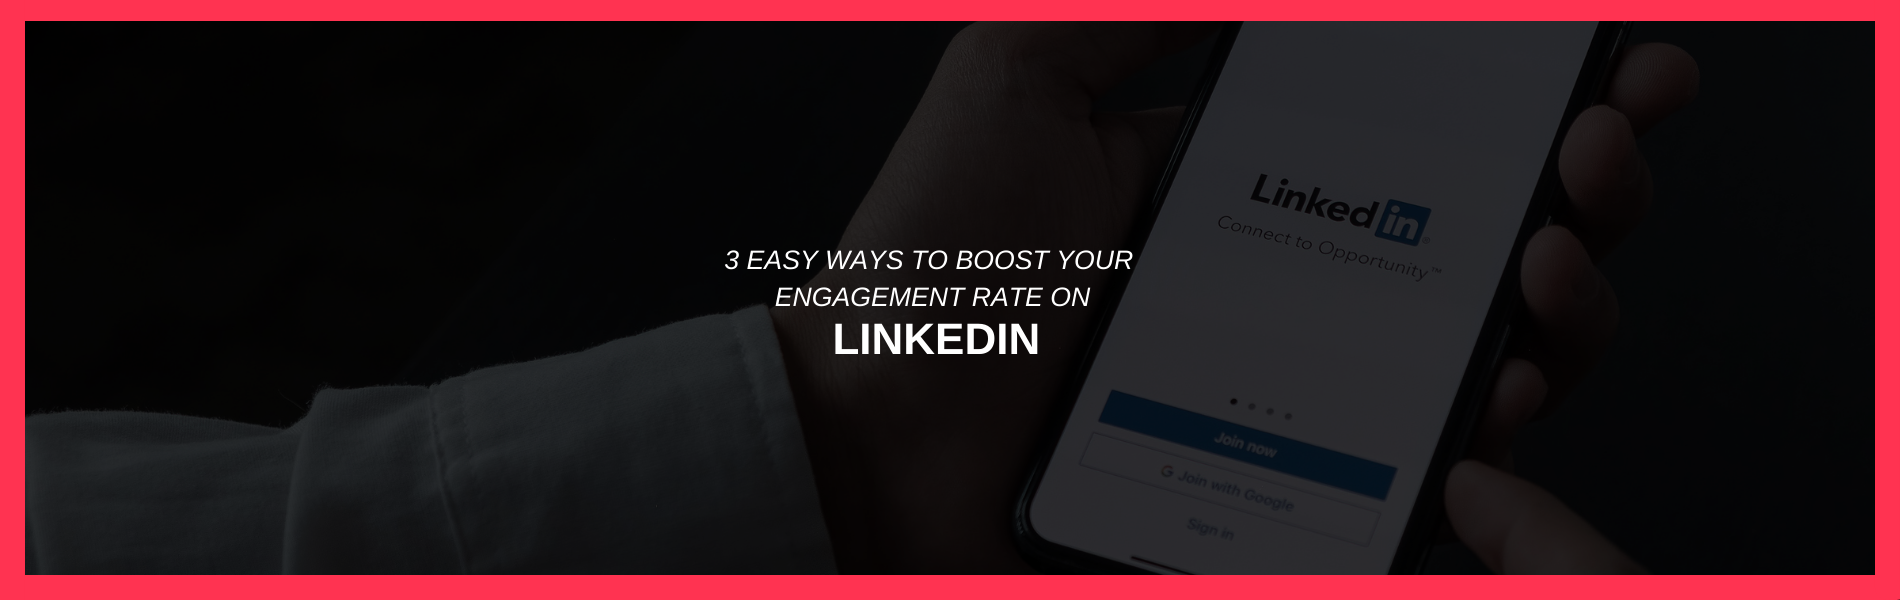 3 Easy Ways to Boost Your Engagement Rate on LinkedIn